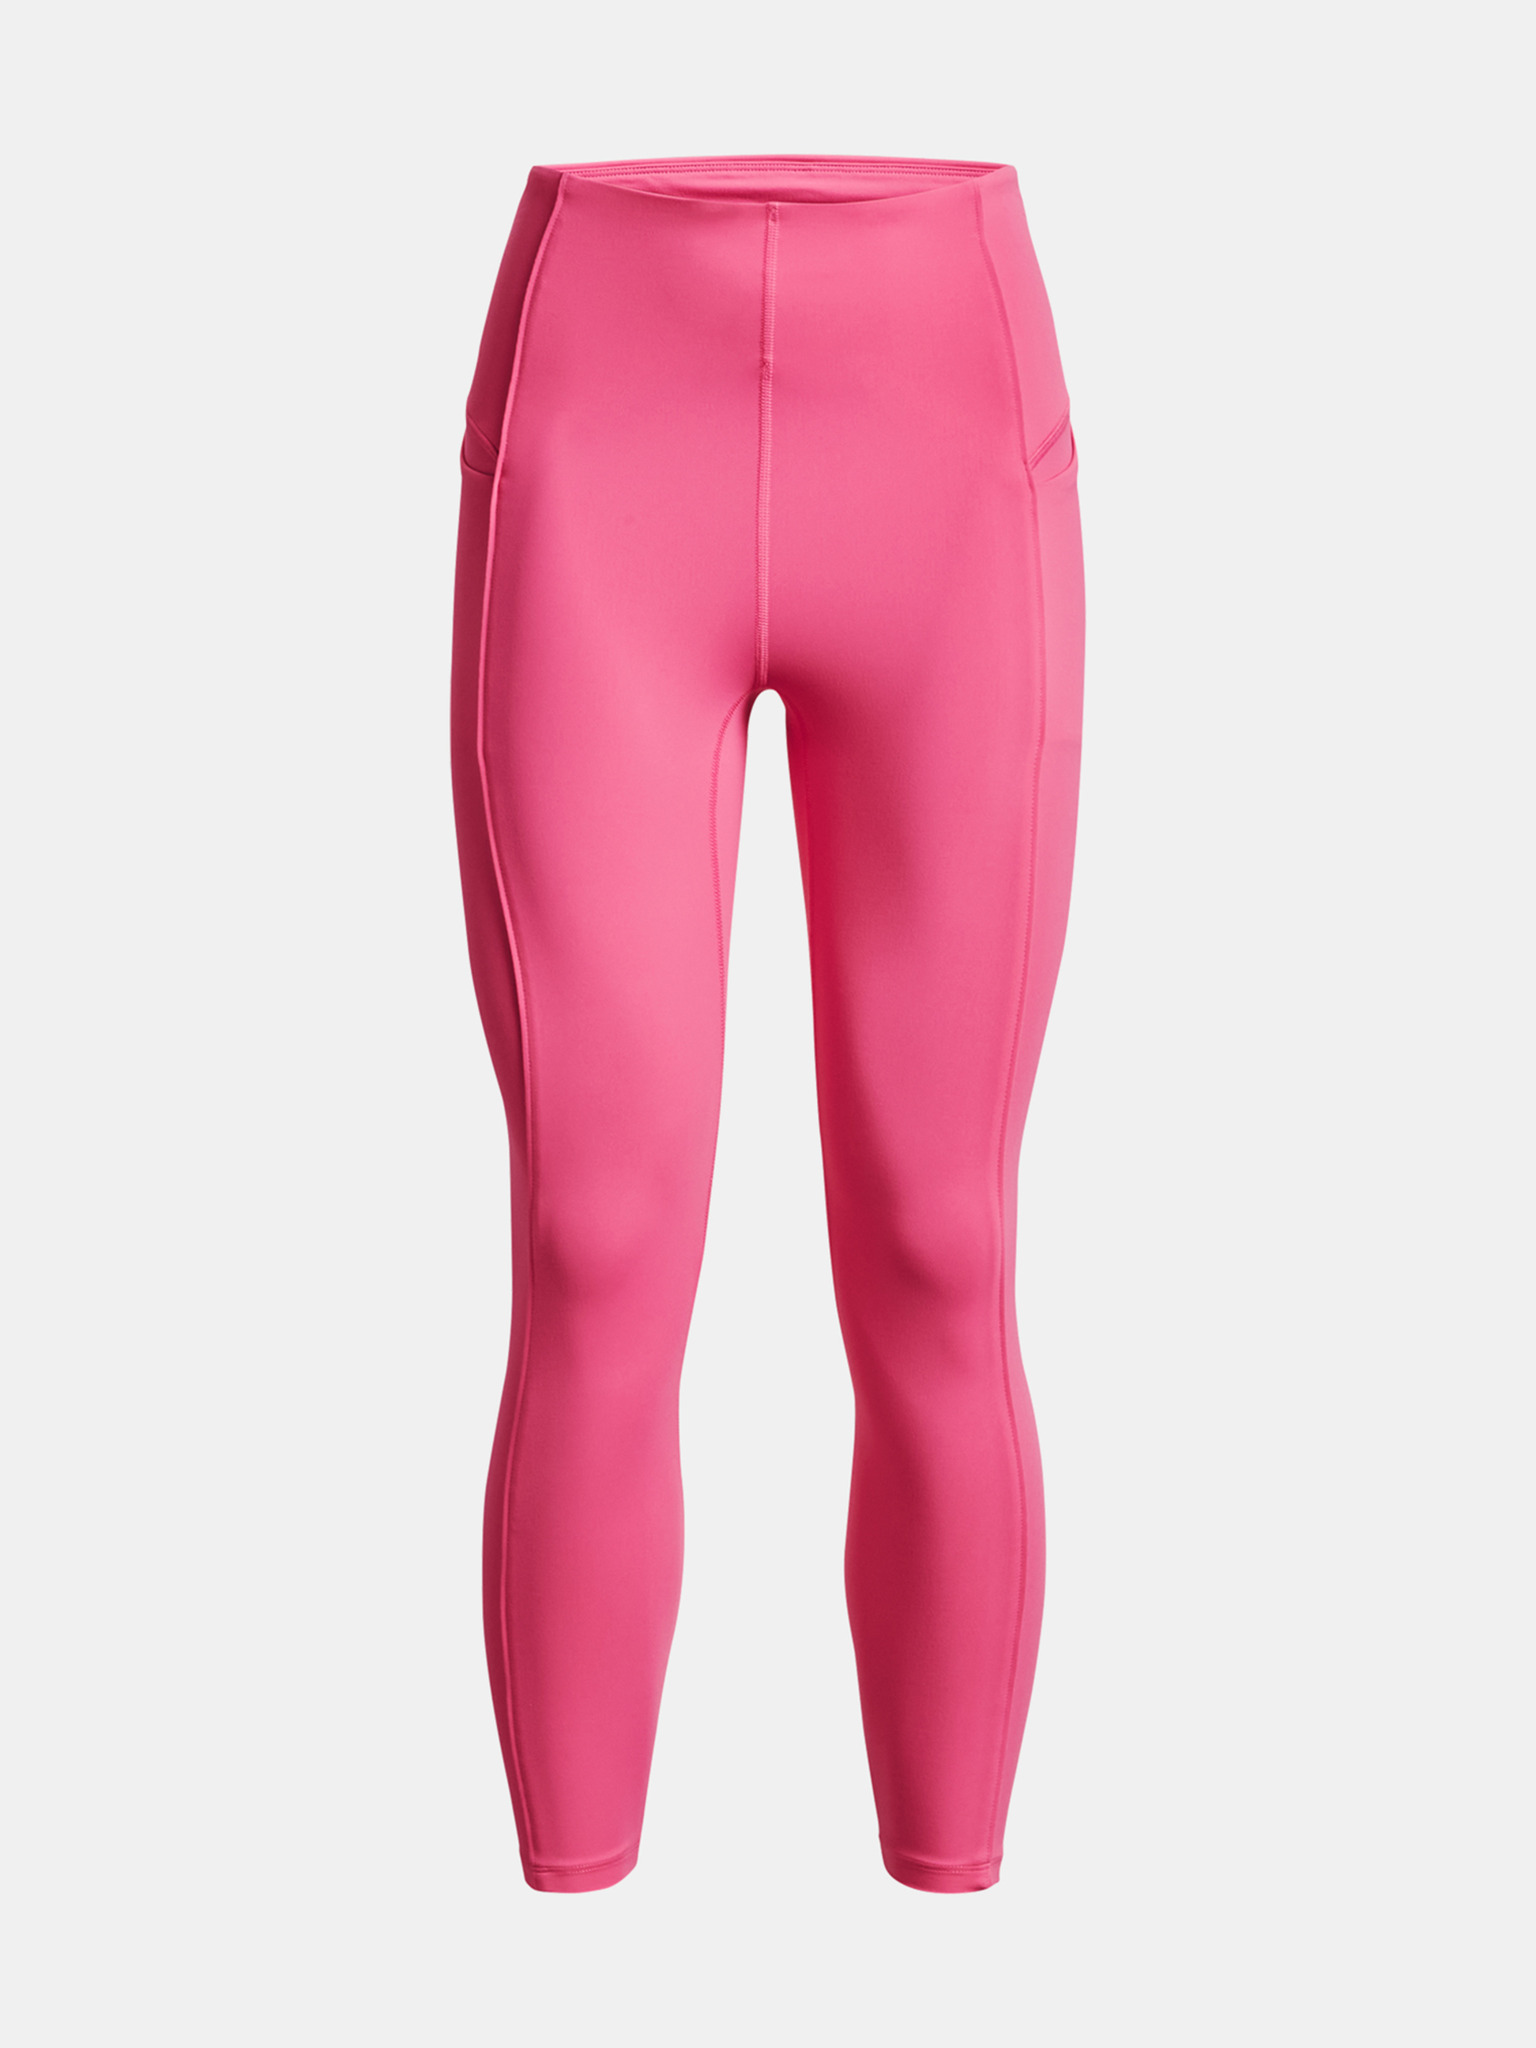 Under Armour Womens Meridian Ankle Leggings - Pink